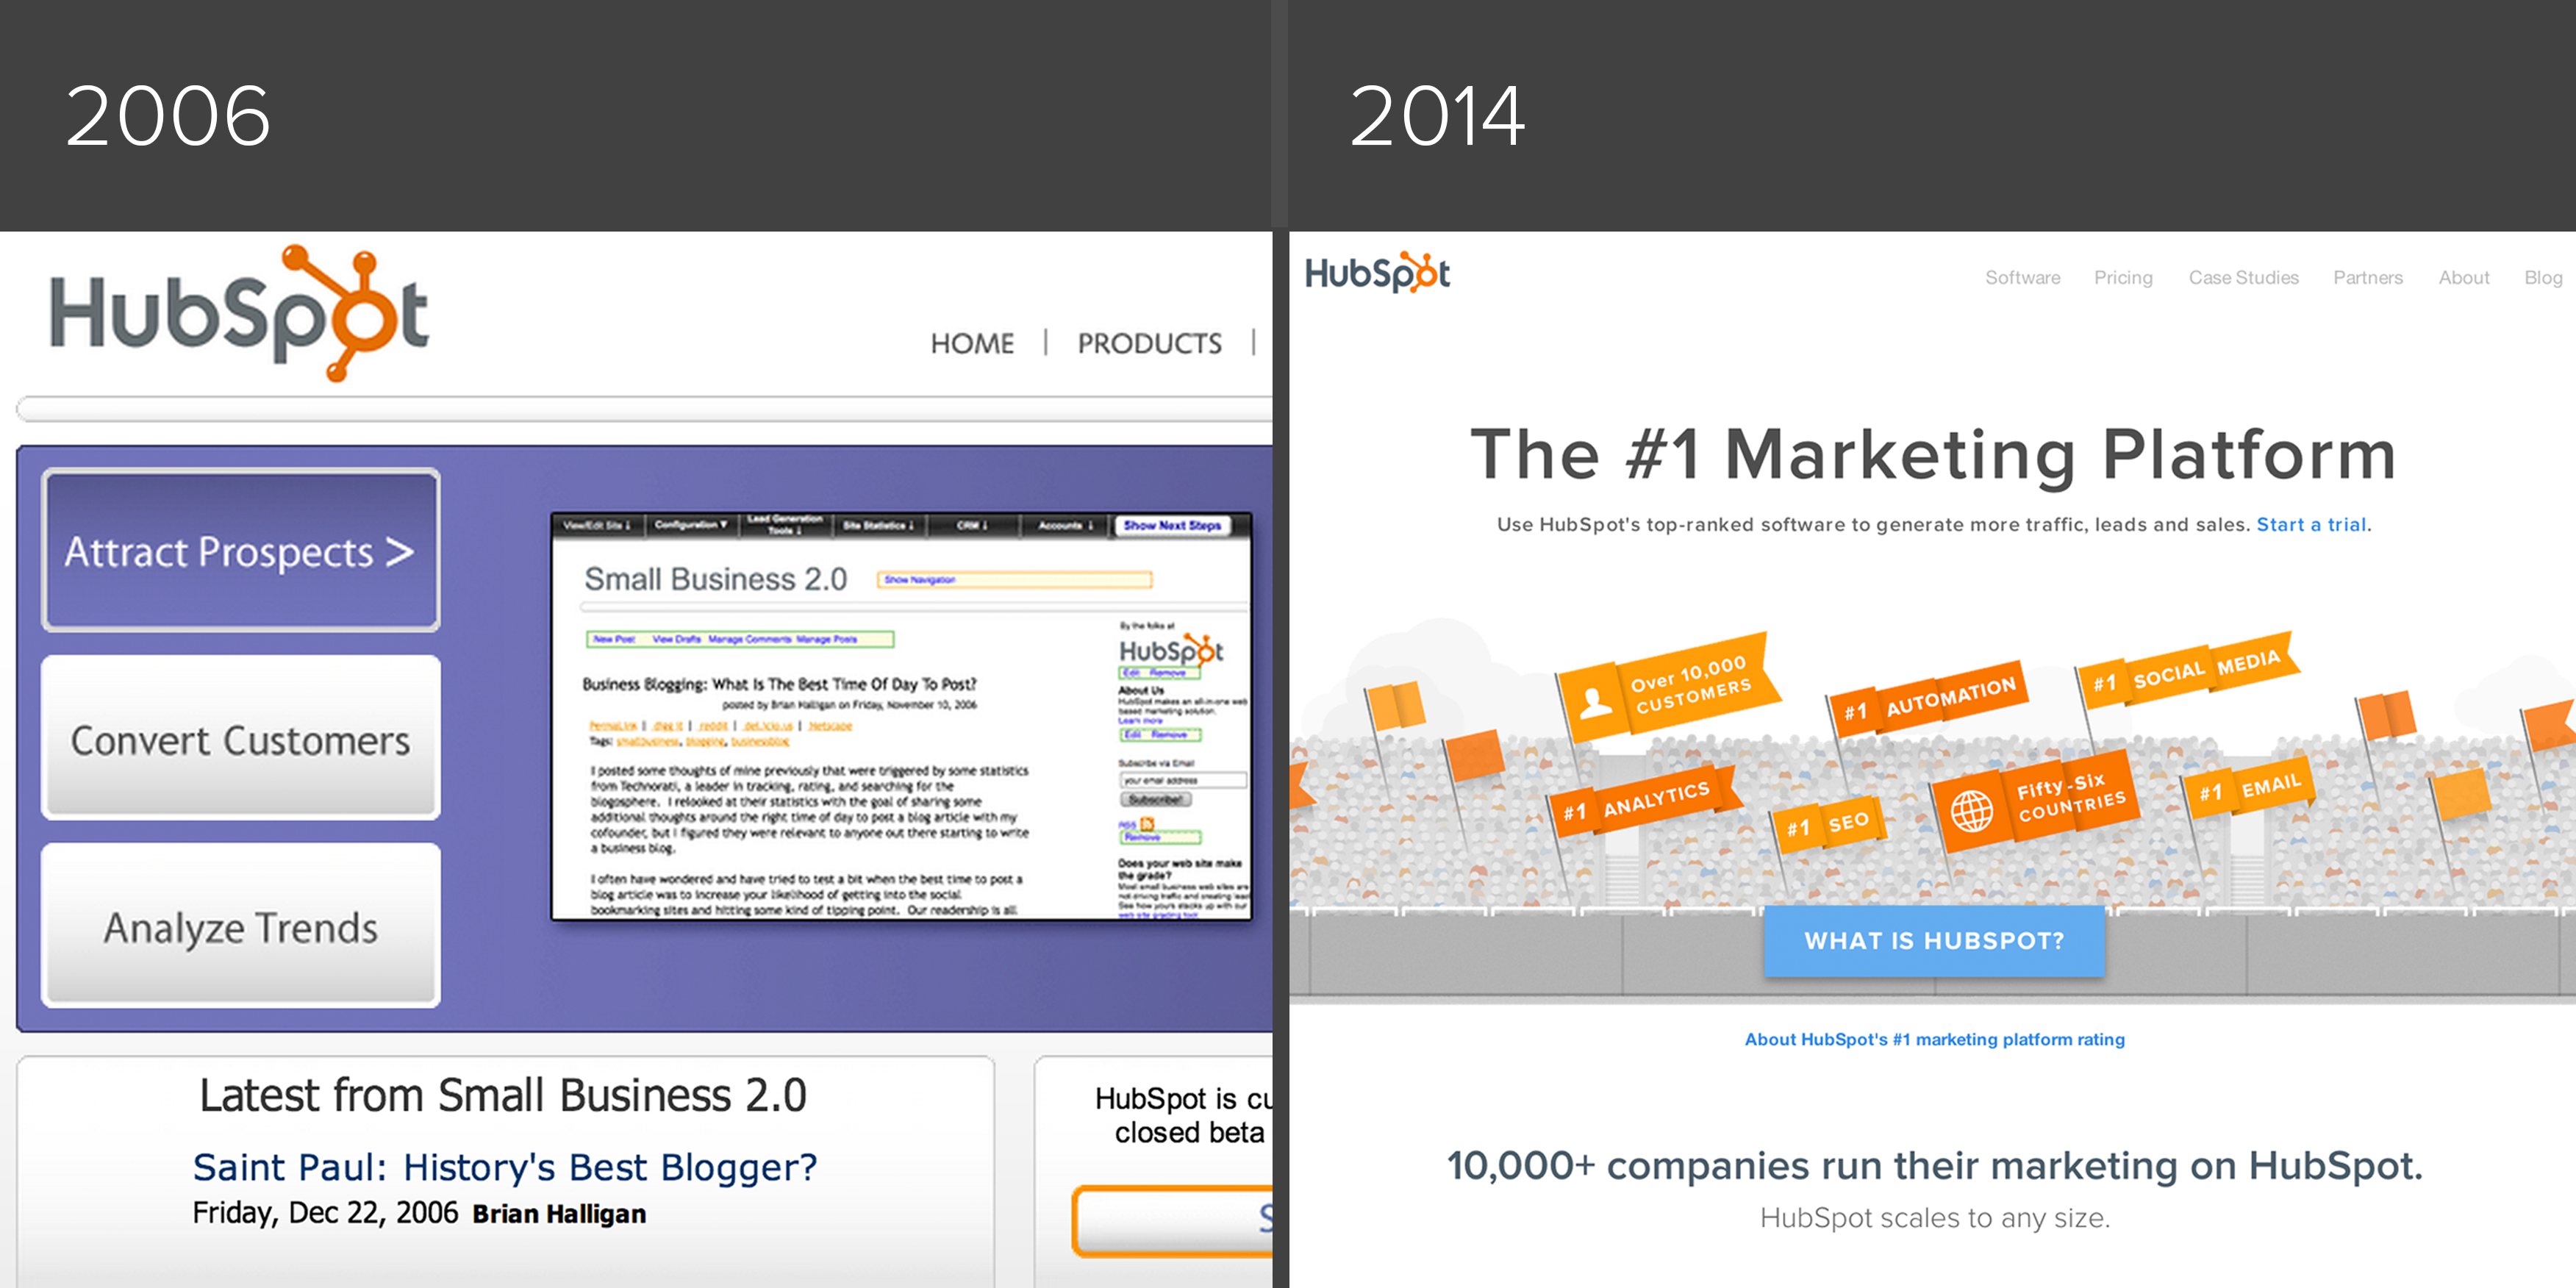 HubSpot_Then_and_Now-1